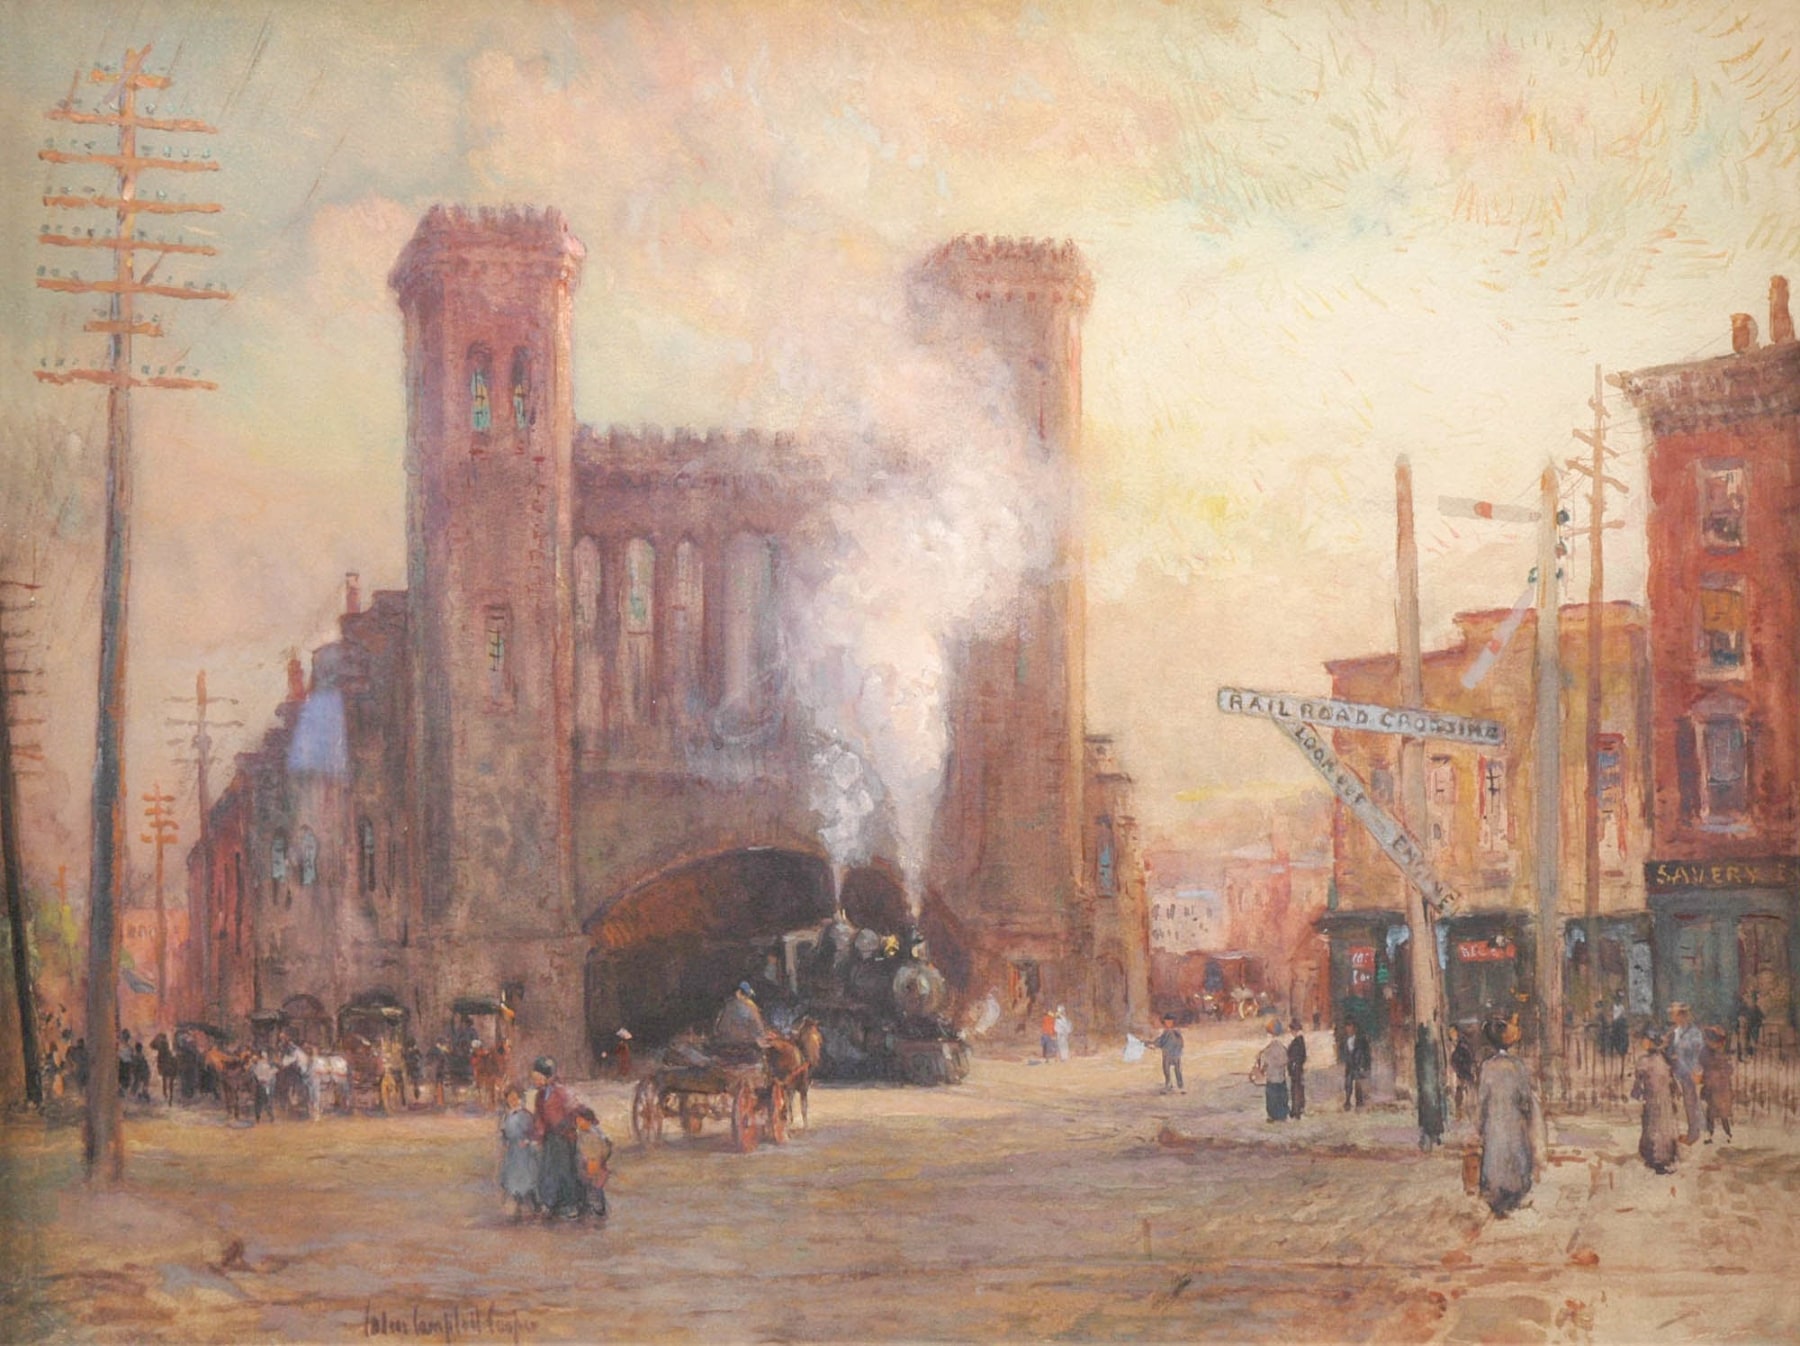 Colin Campbell Cooper, The Train Round House, Salem, Massachusetts, c 1910